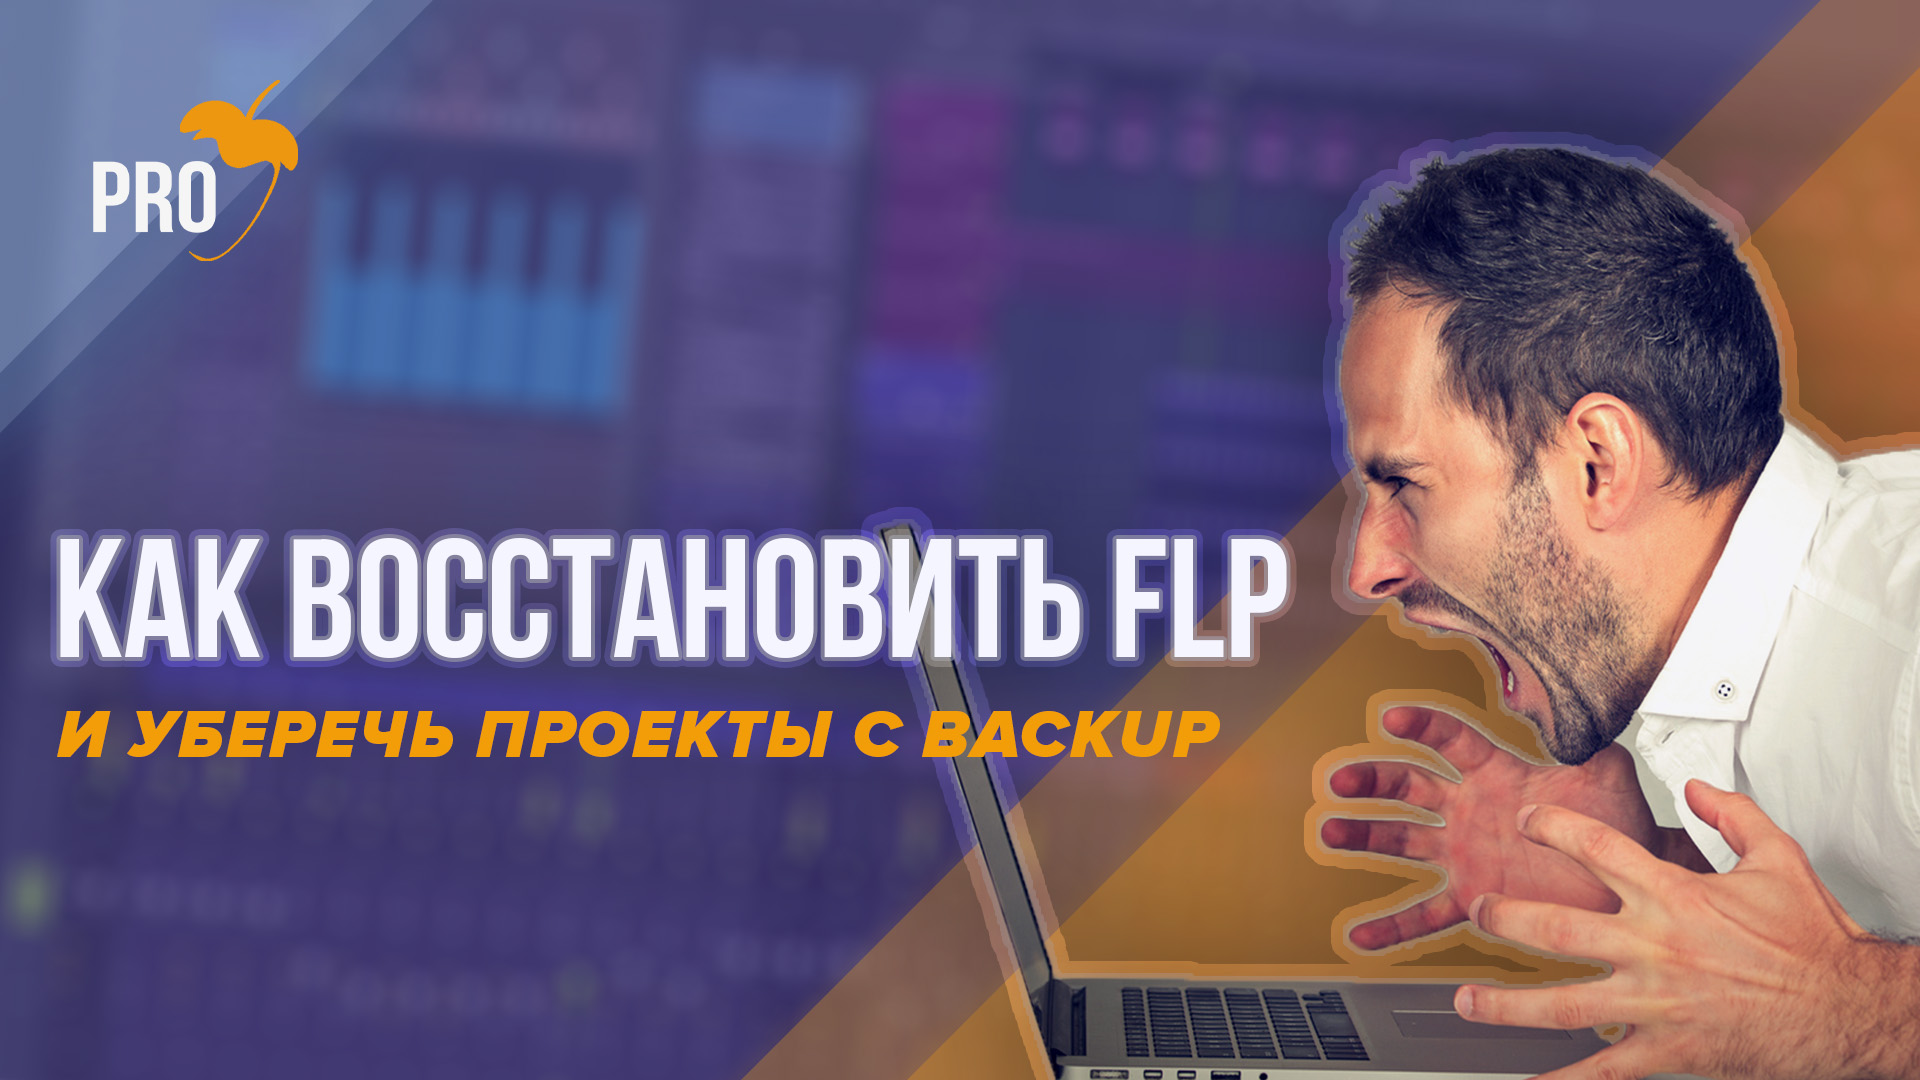 FL PRO Article How to Back Up Your FLPs